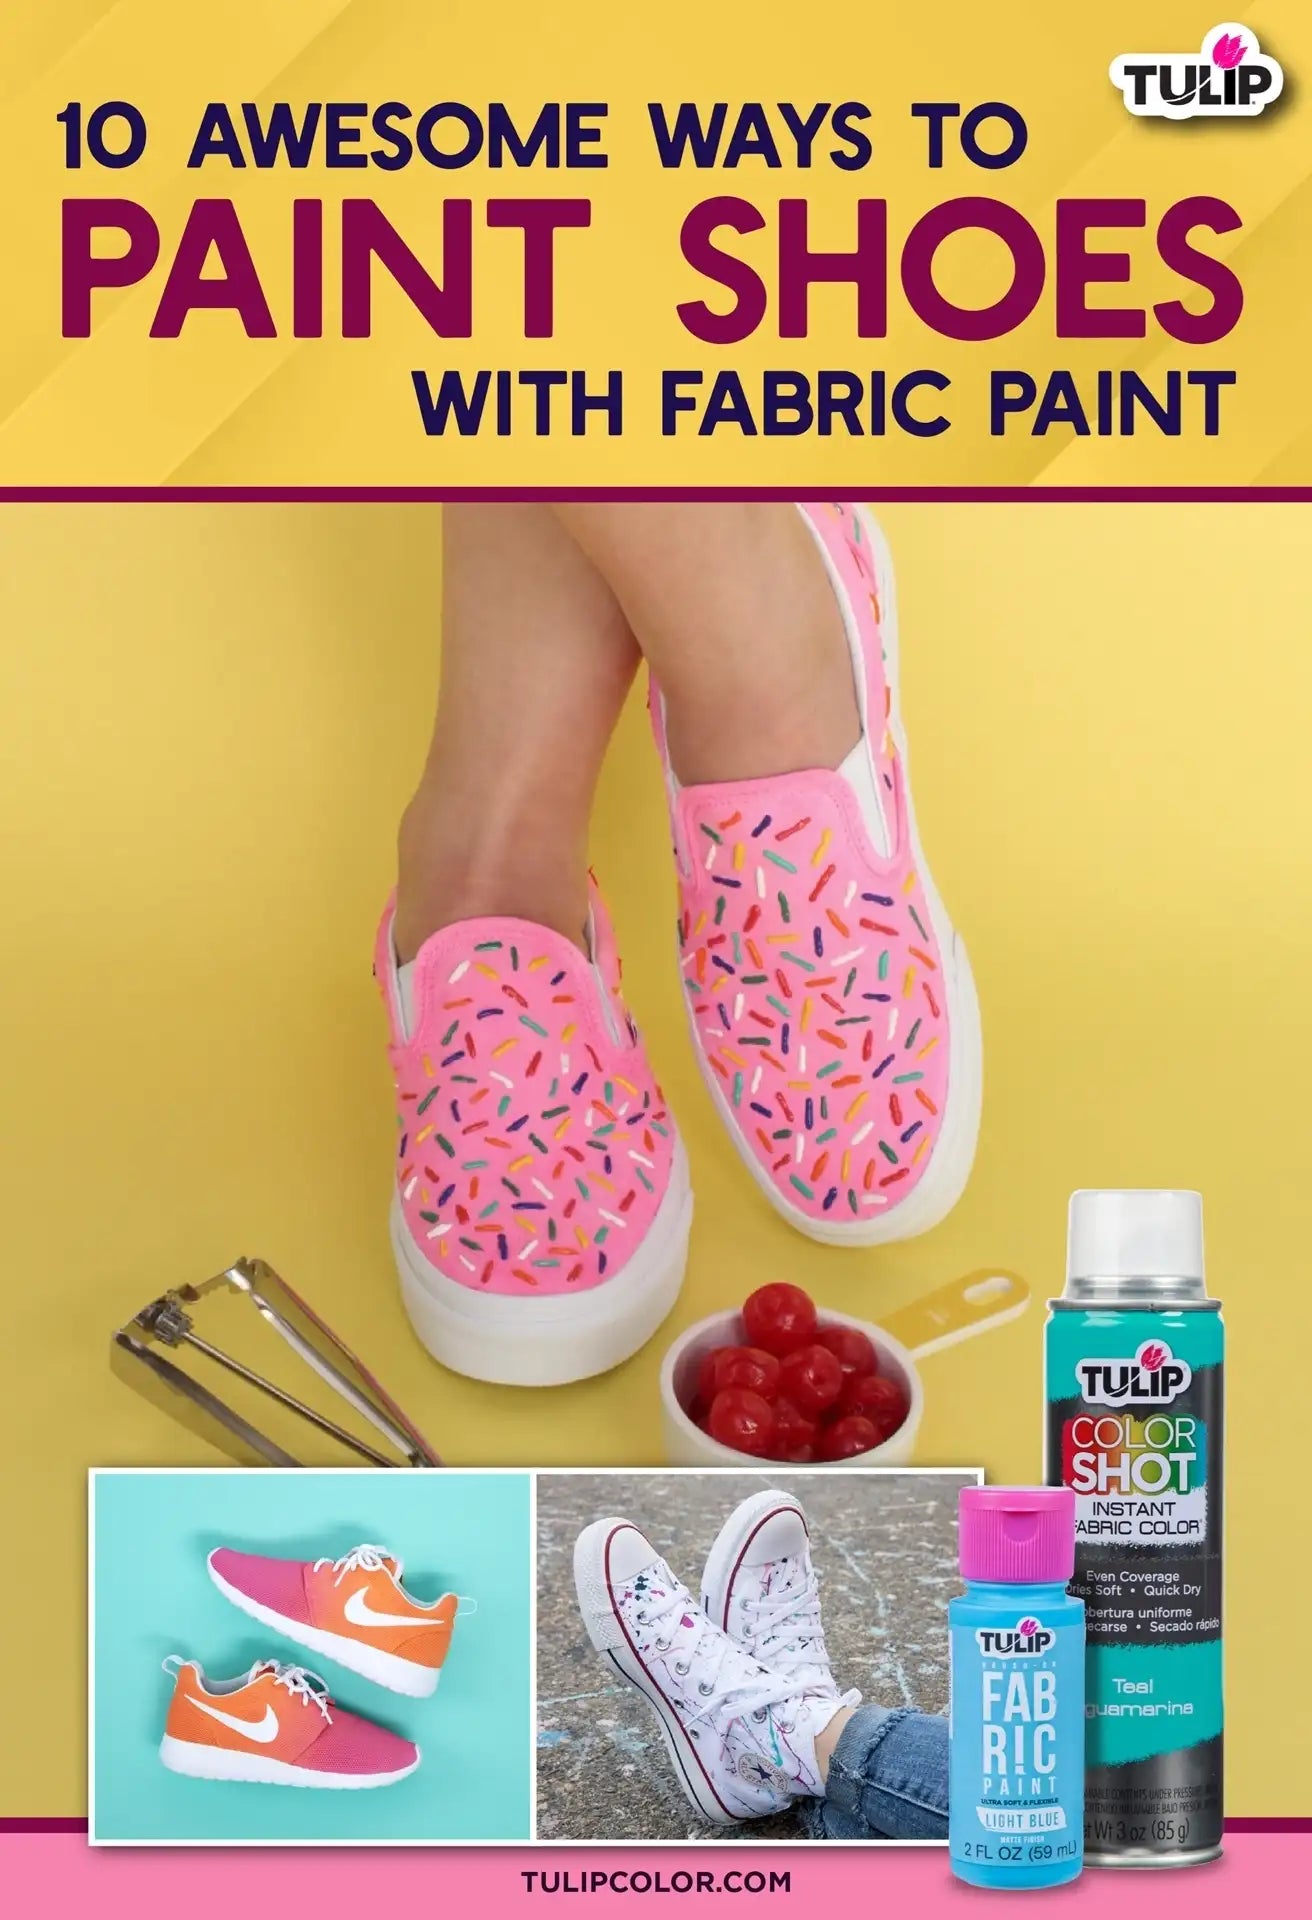 10 Awesome Ways to Paint Shoes with Fabric Paint – Tulip Color Crafts